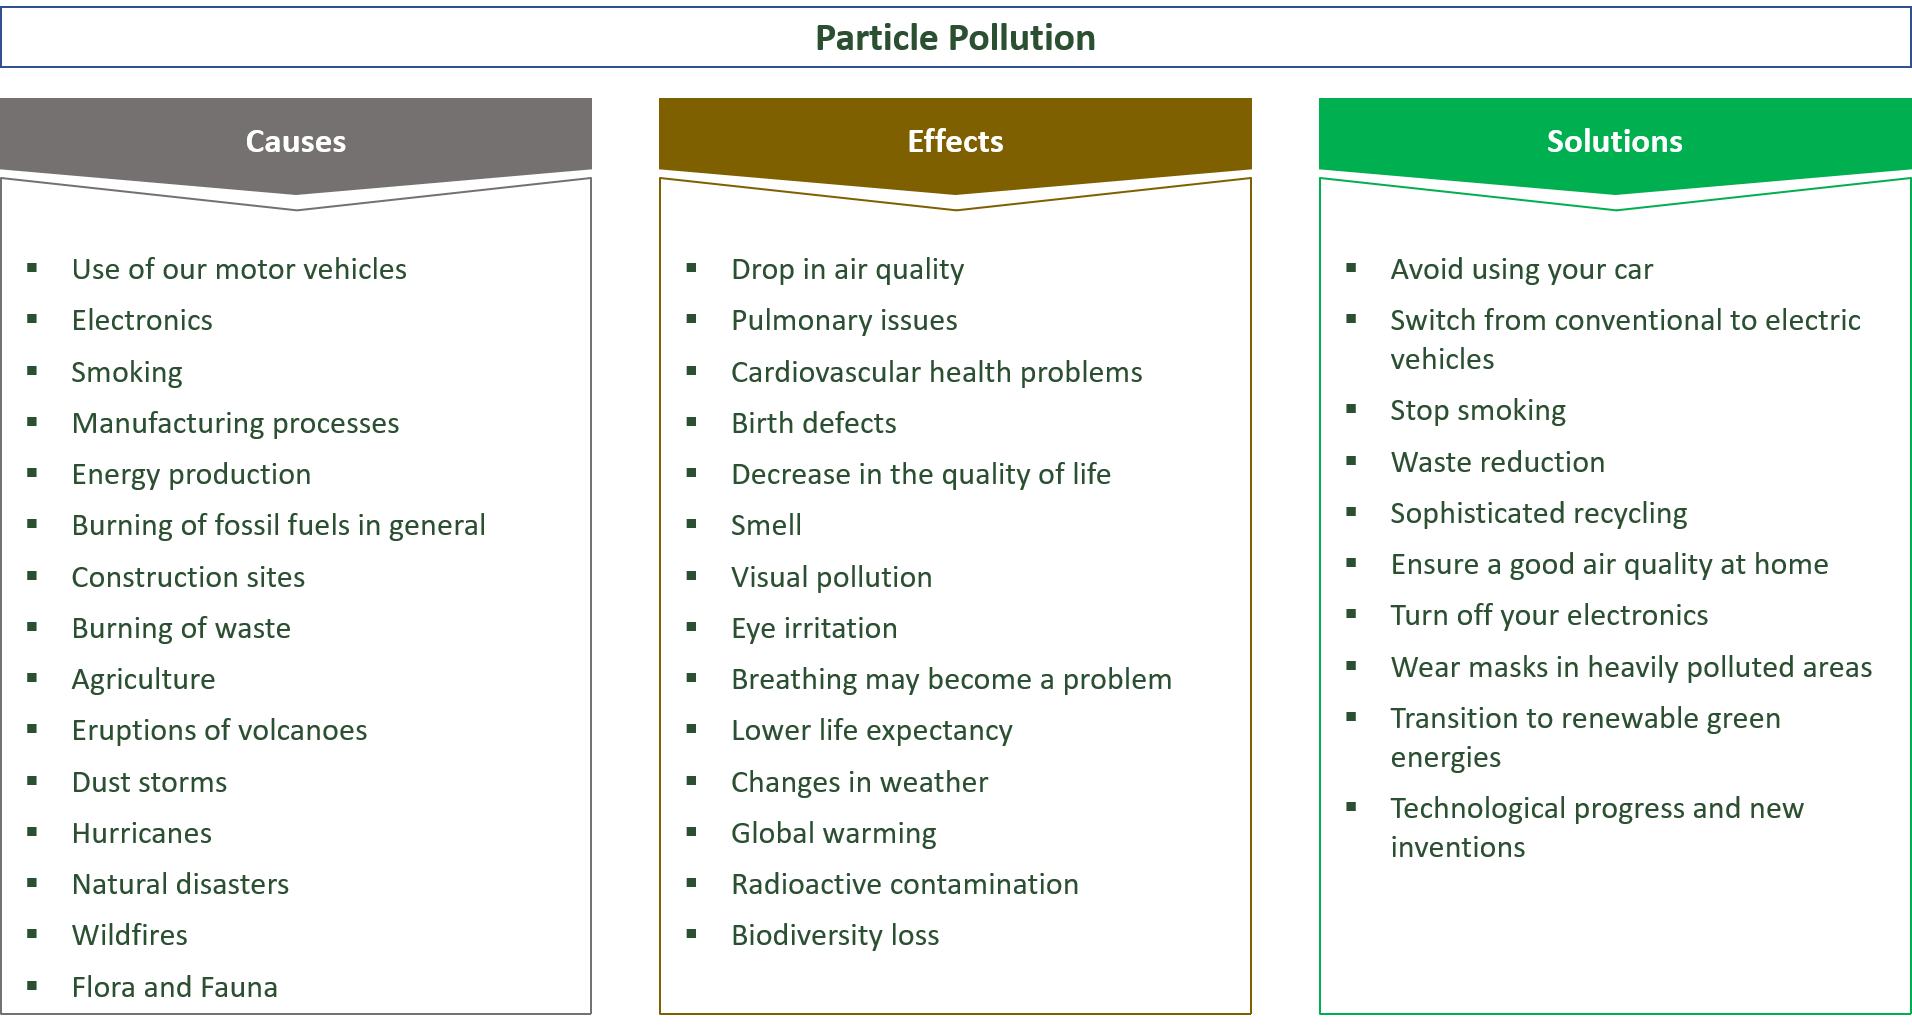 causes, effects and solutions for particulate pollution